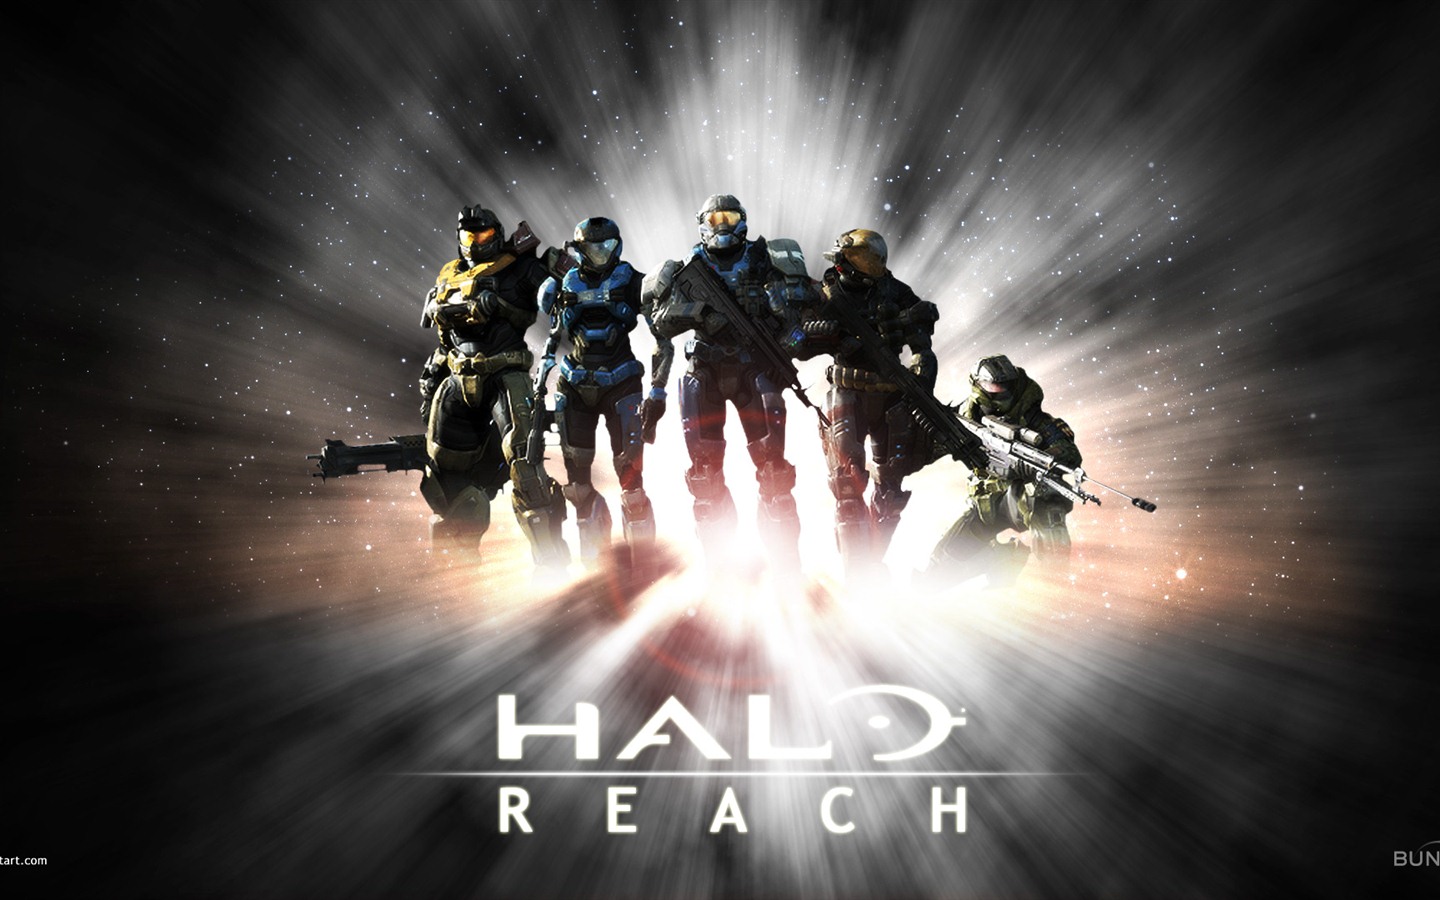 Halo Game HD Wallpapers #24 - 1440x900